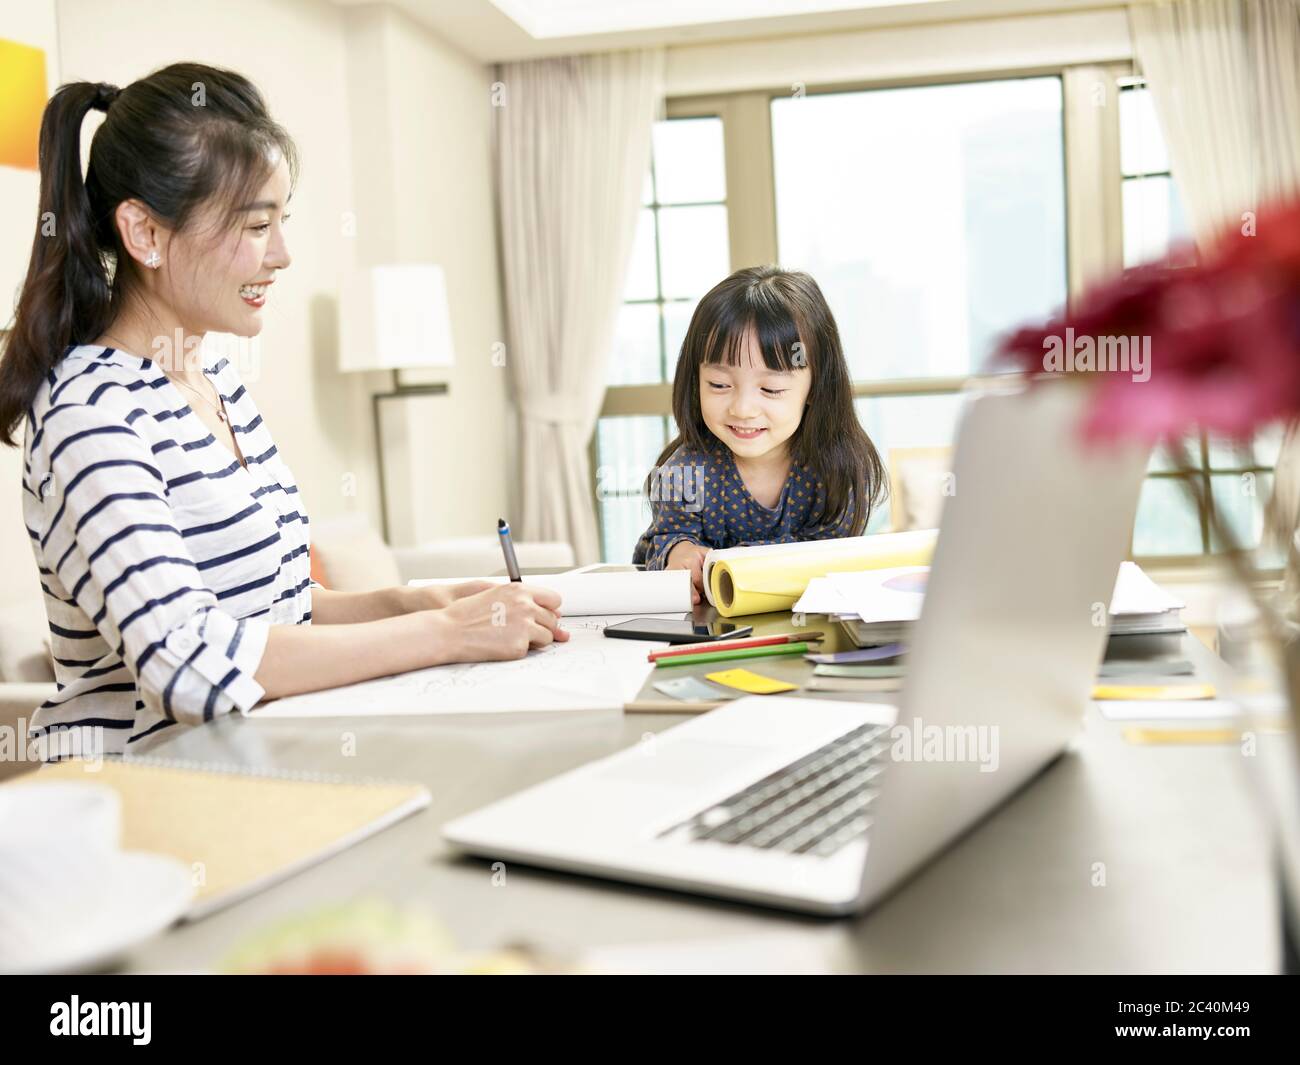 young asian designer mother working from home while taking care of daughter (artwork in background digitally altered) Stock Photo